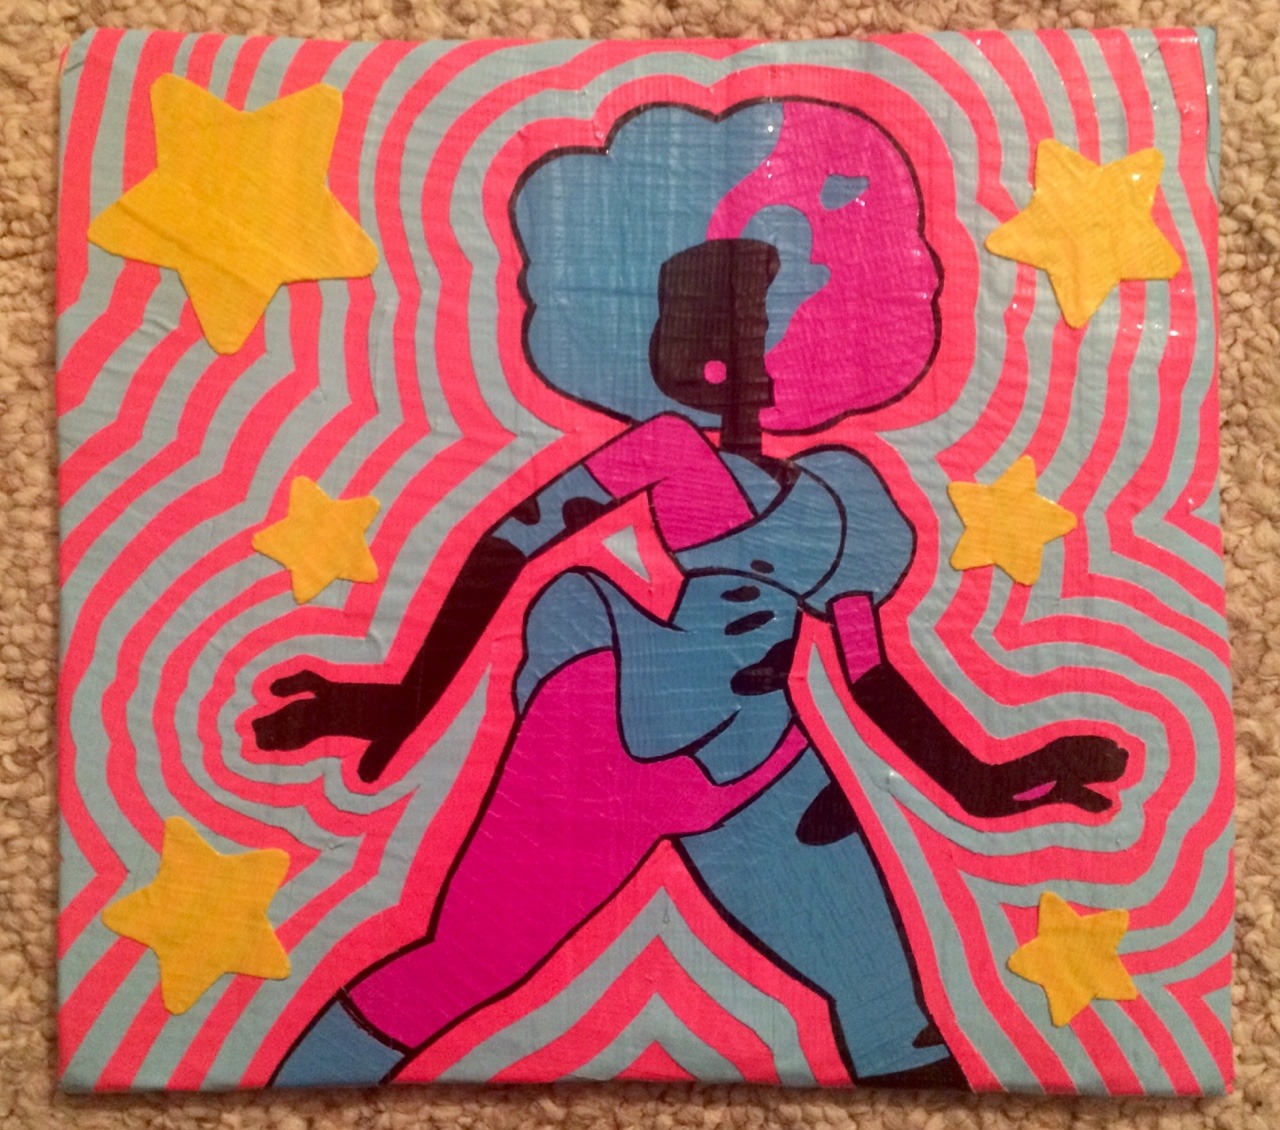 Cotton candy Garnet made with colored duct tape.